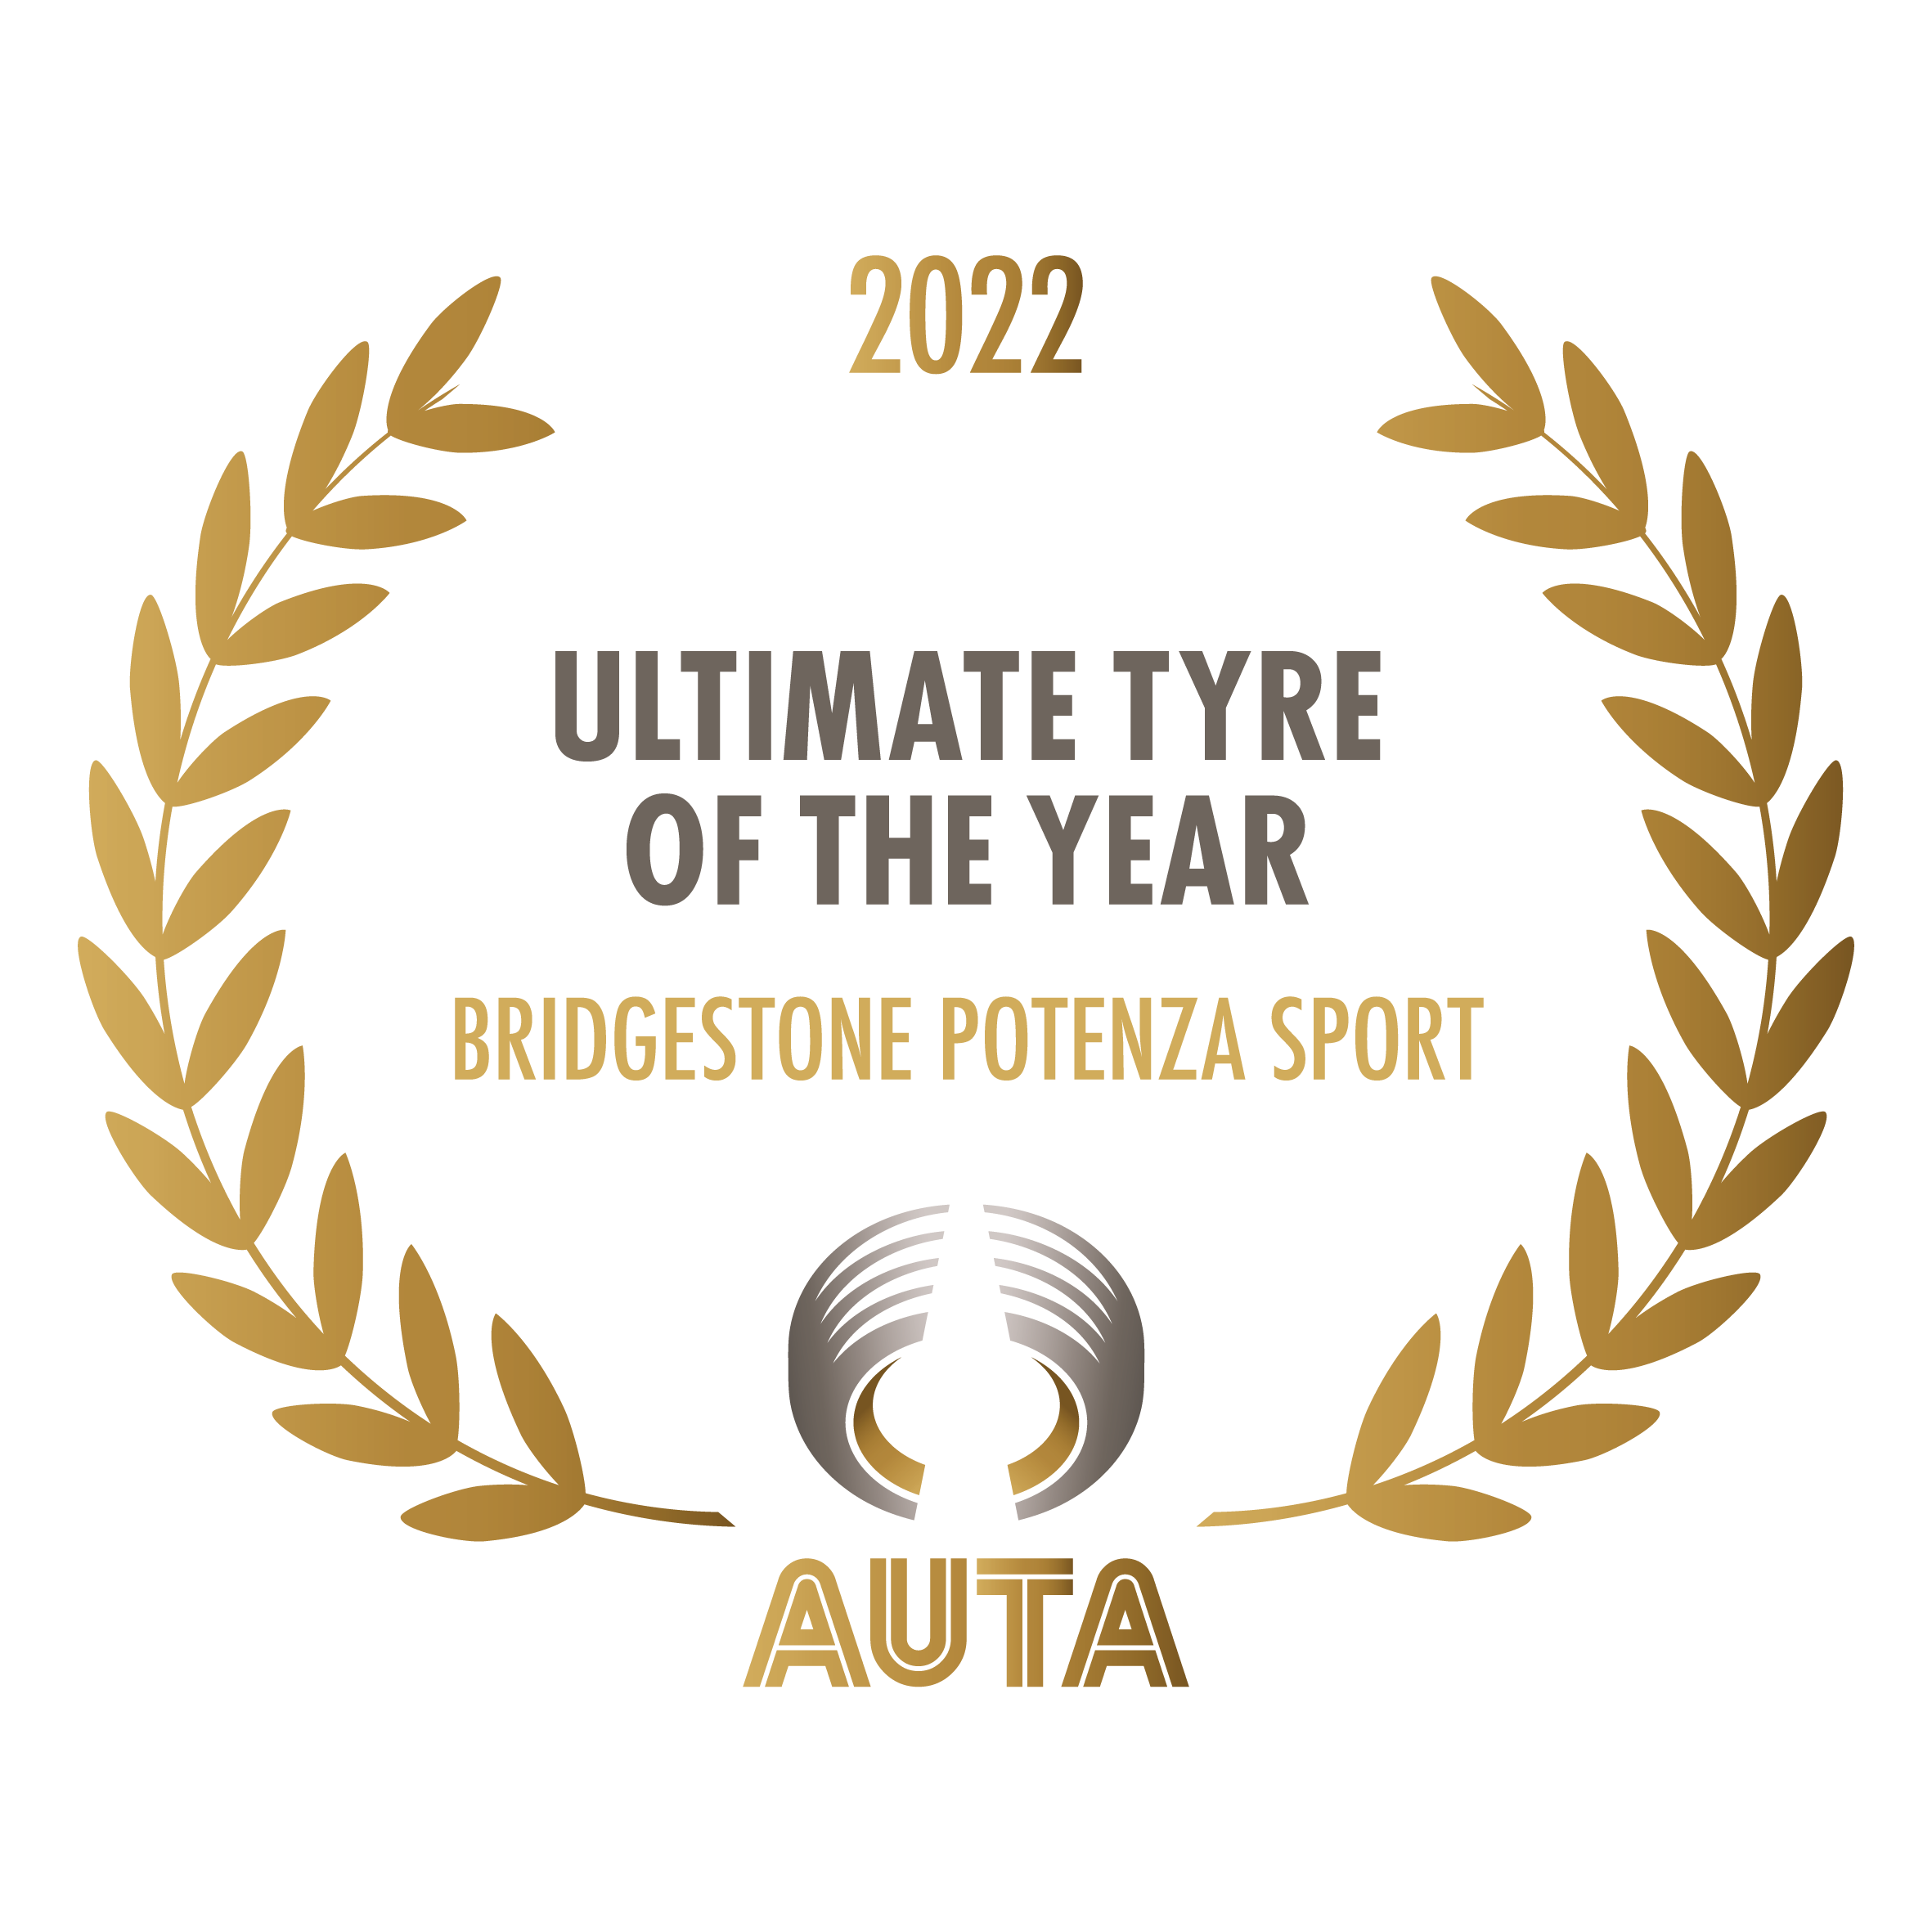 Asia's Ultimate Tyre